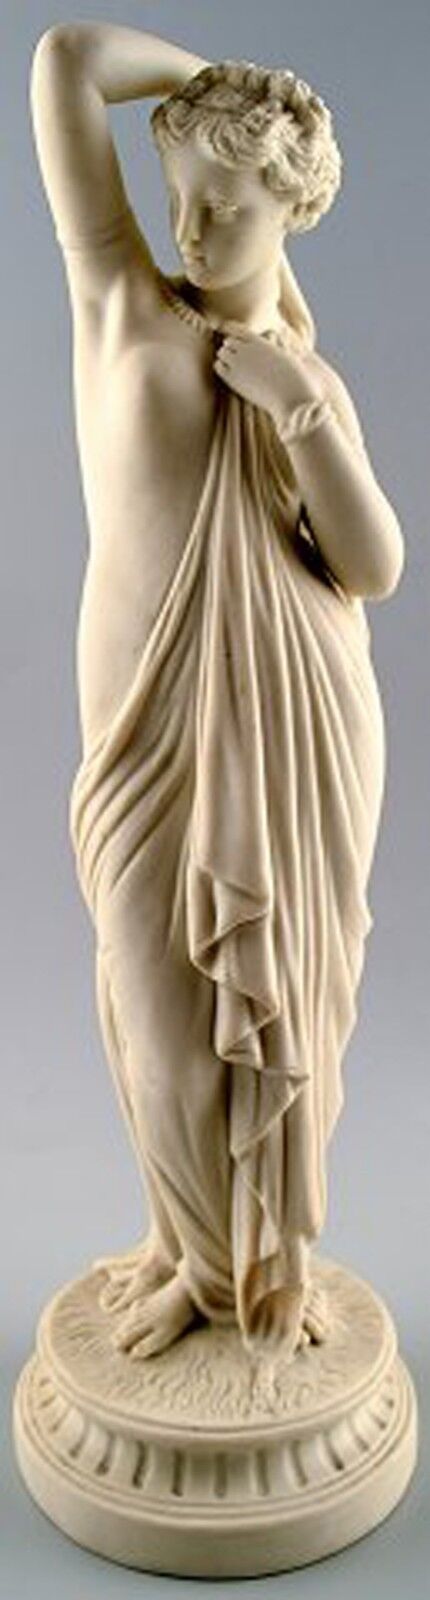 Antique large biscuit figure of semi-nude woman in classical style.